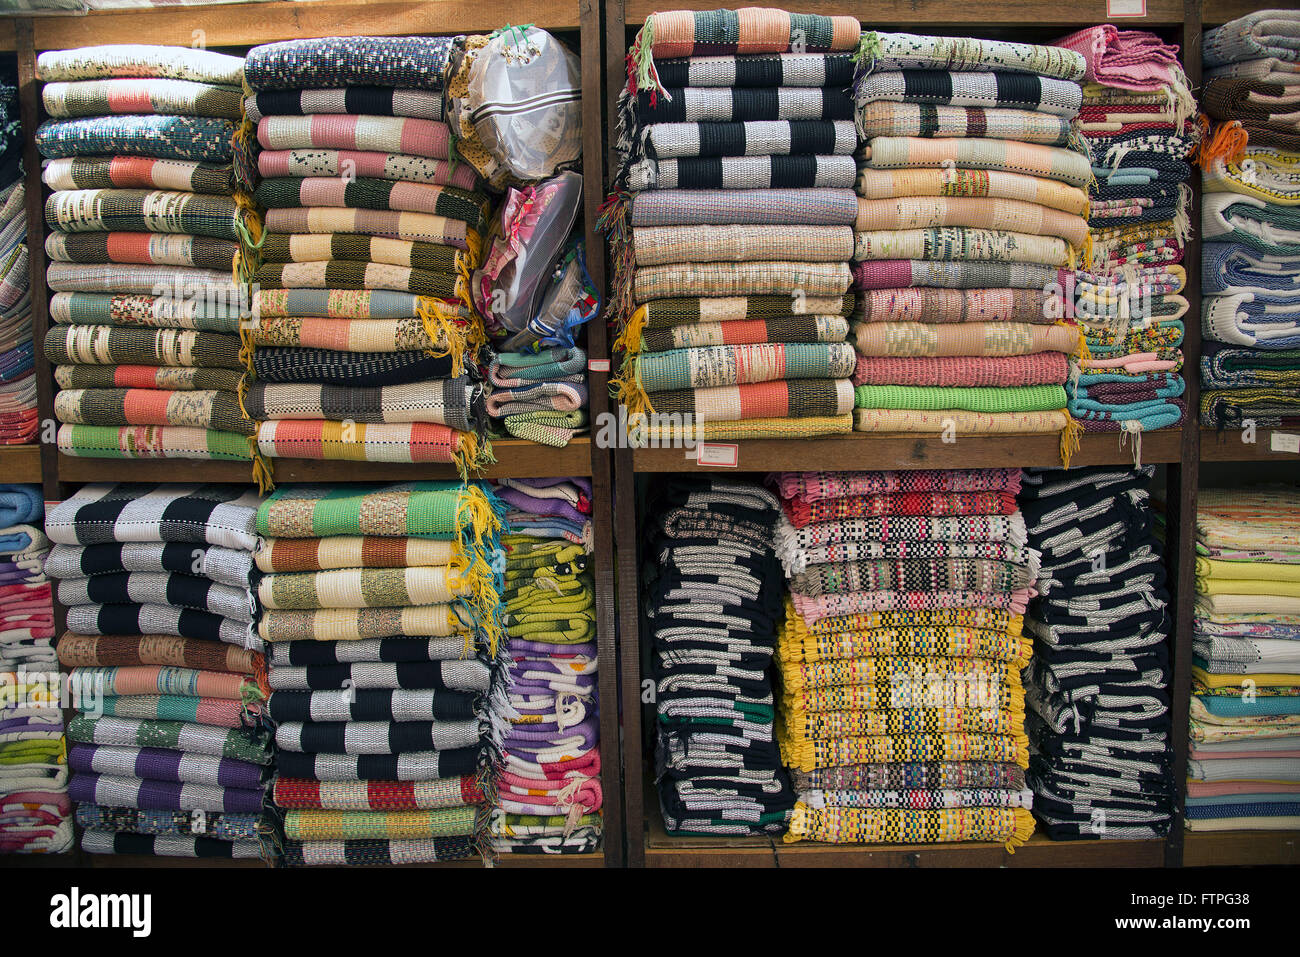 Products store specializing in textile crafts Stock Photo